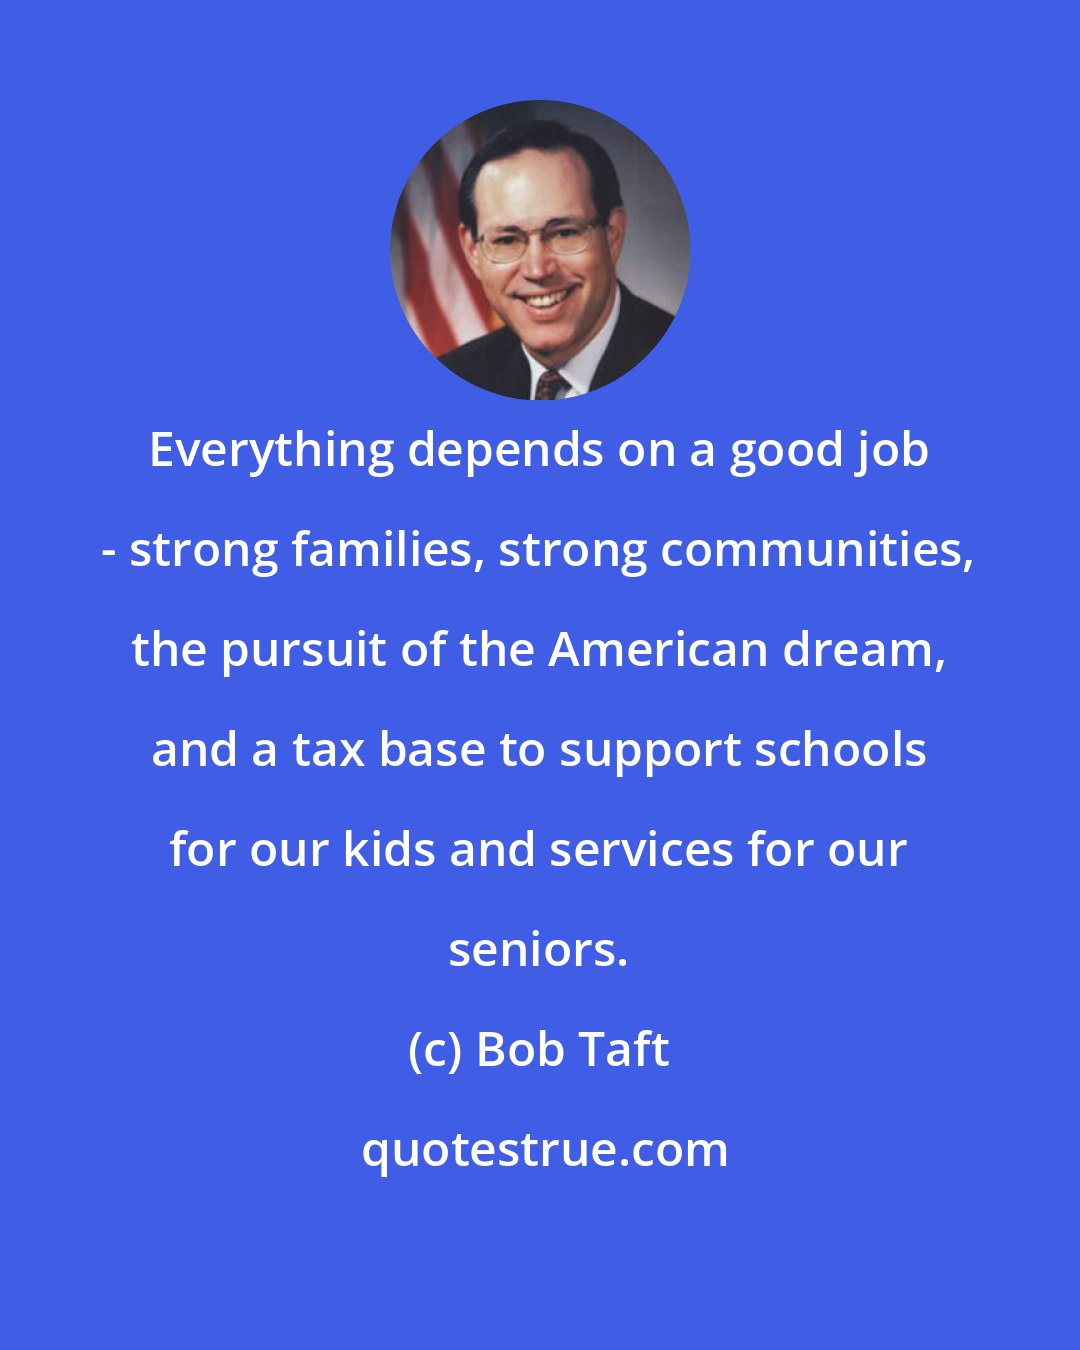 Bob Taft: Everything depends on a good job - strong families, strong communities, the pursuit of the American dream, and a tax base to support schools for our kids and services for our seniors.